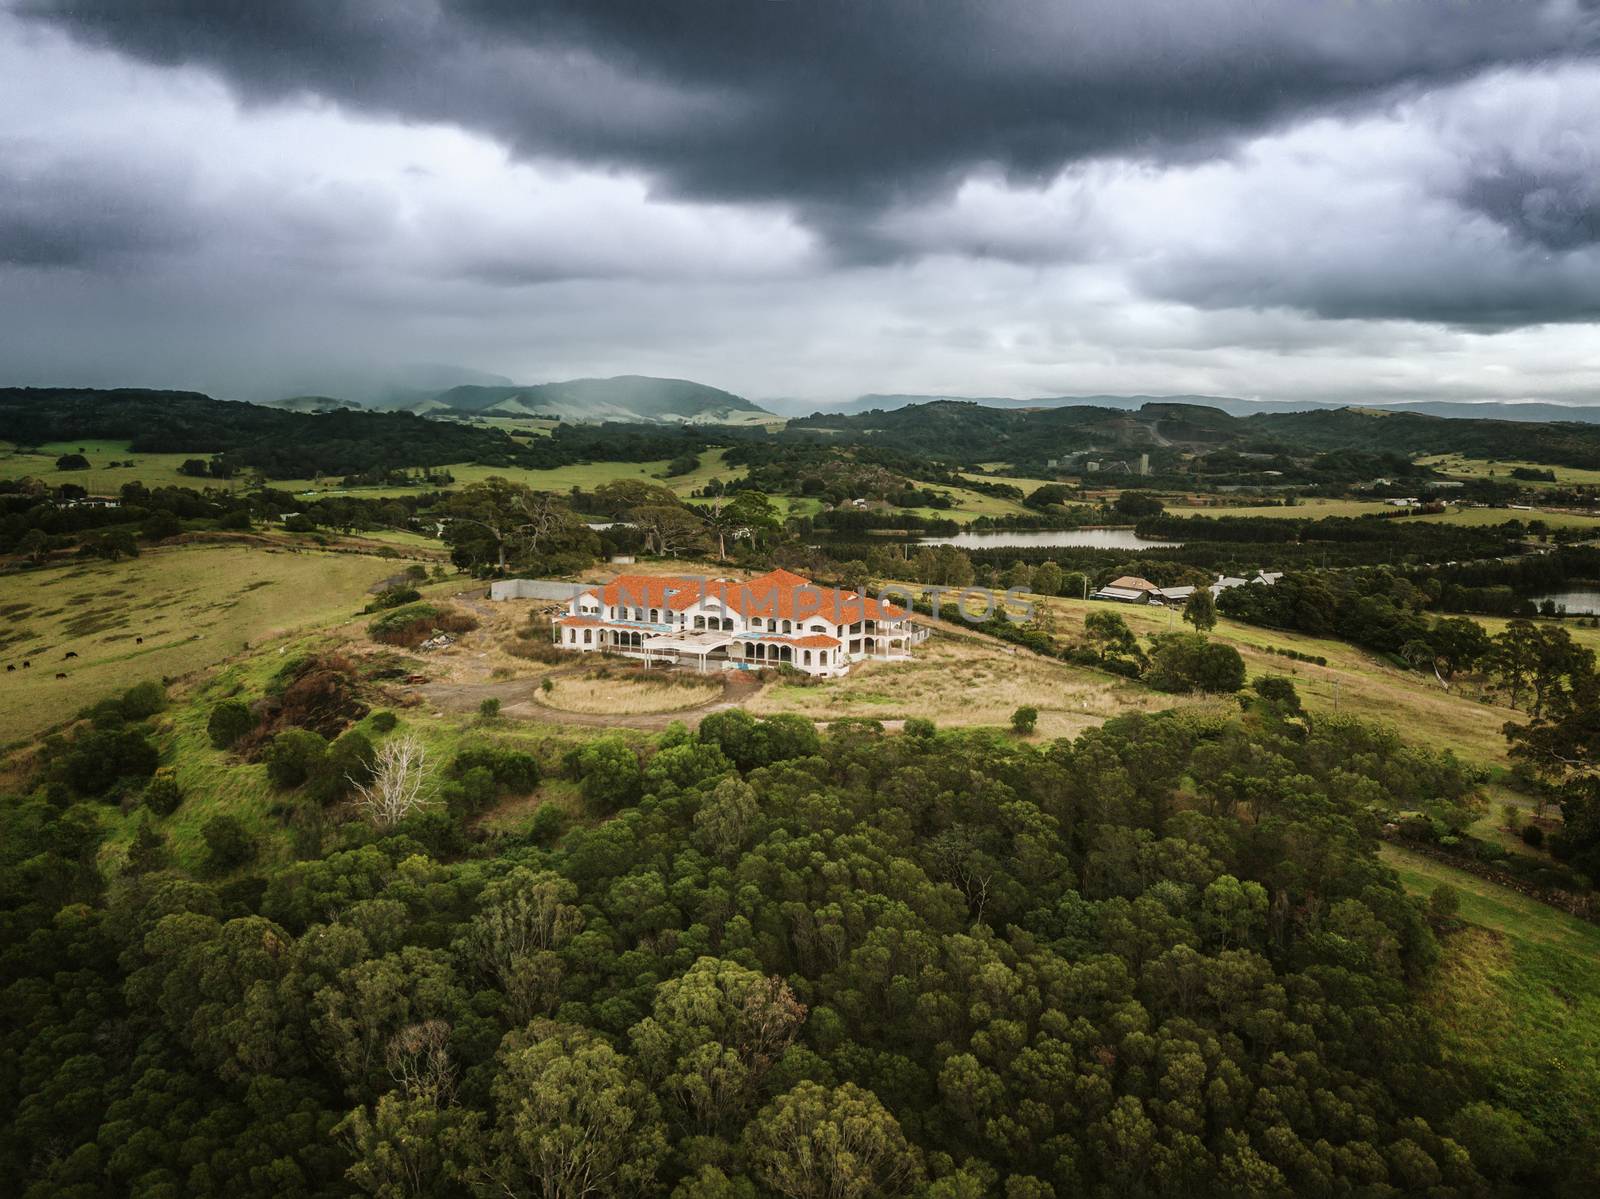 Storm clouds loom over abandoned mansion in rural setting by lovleah